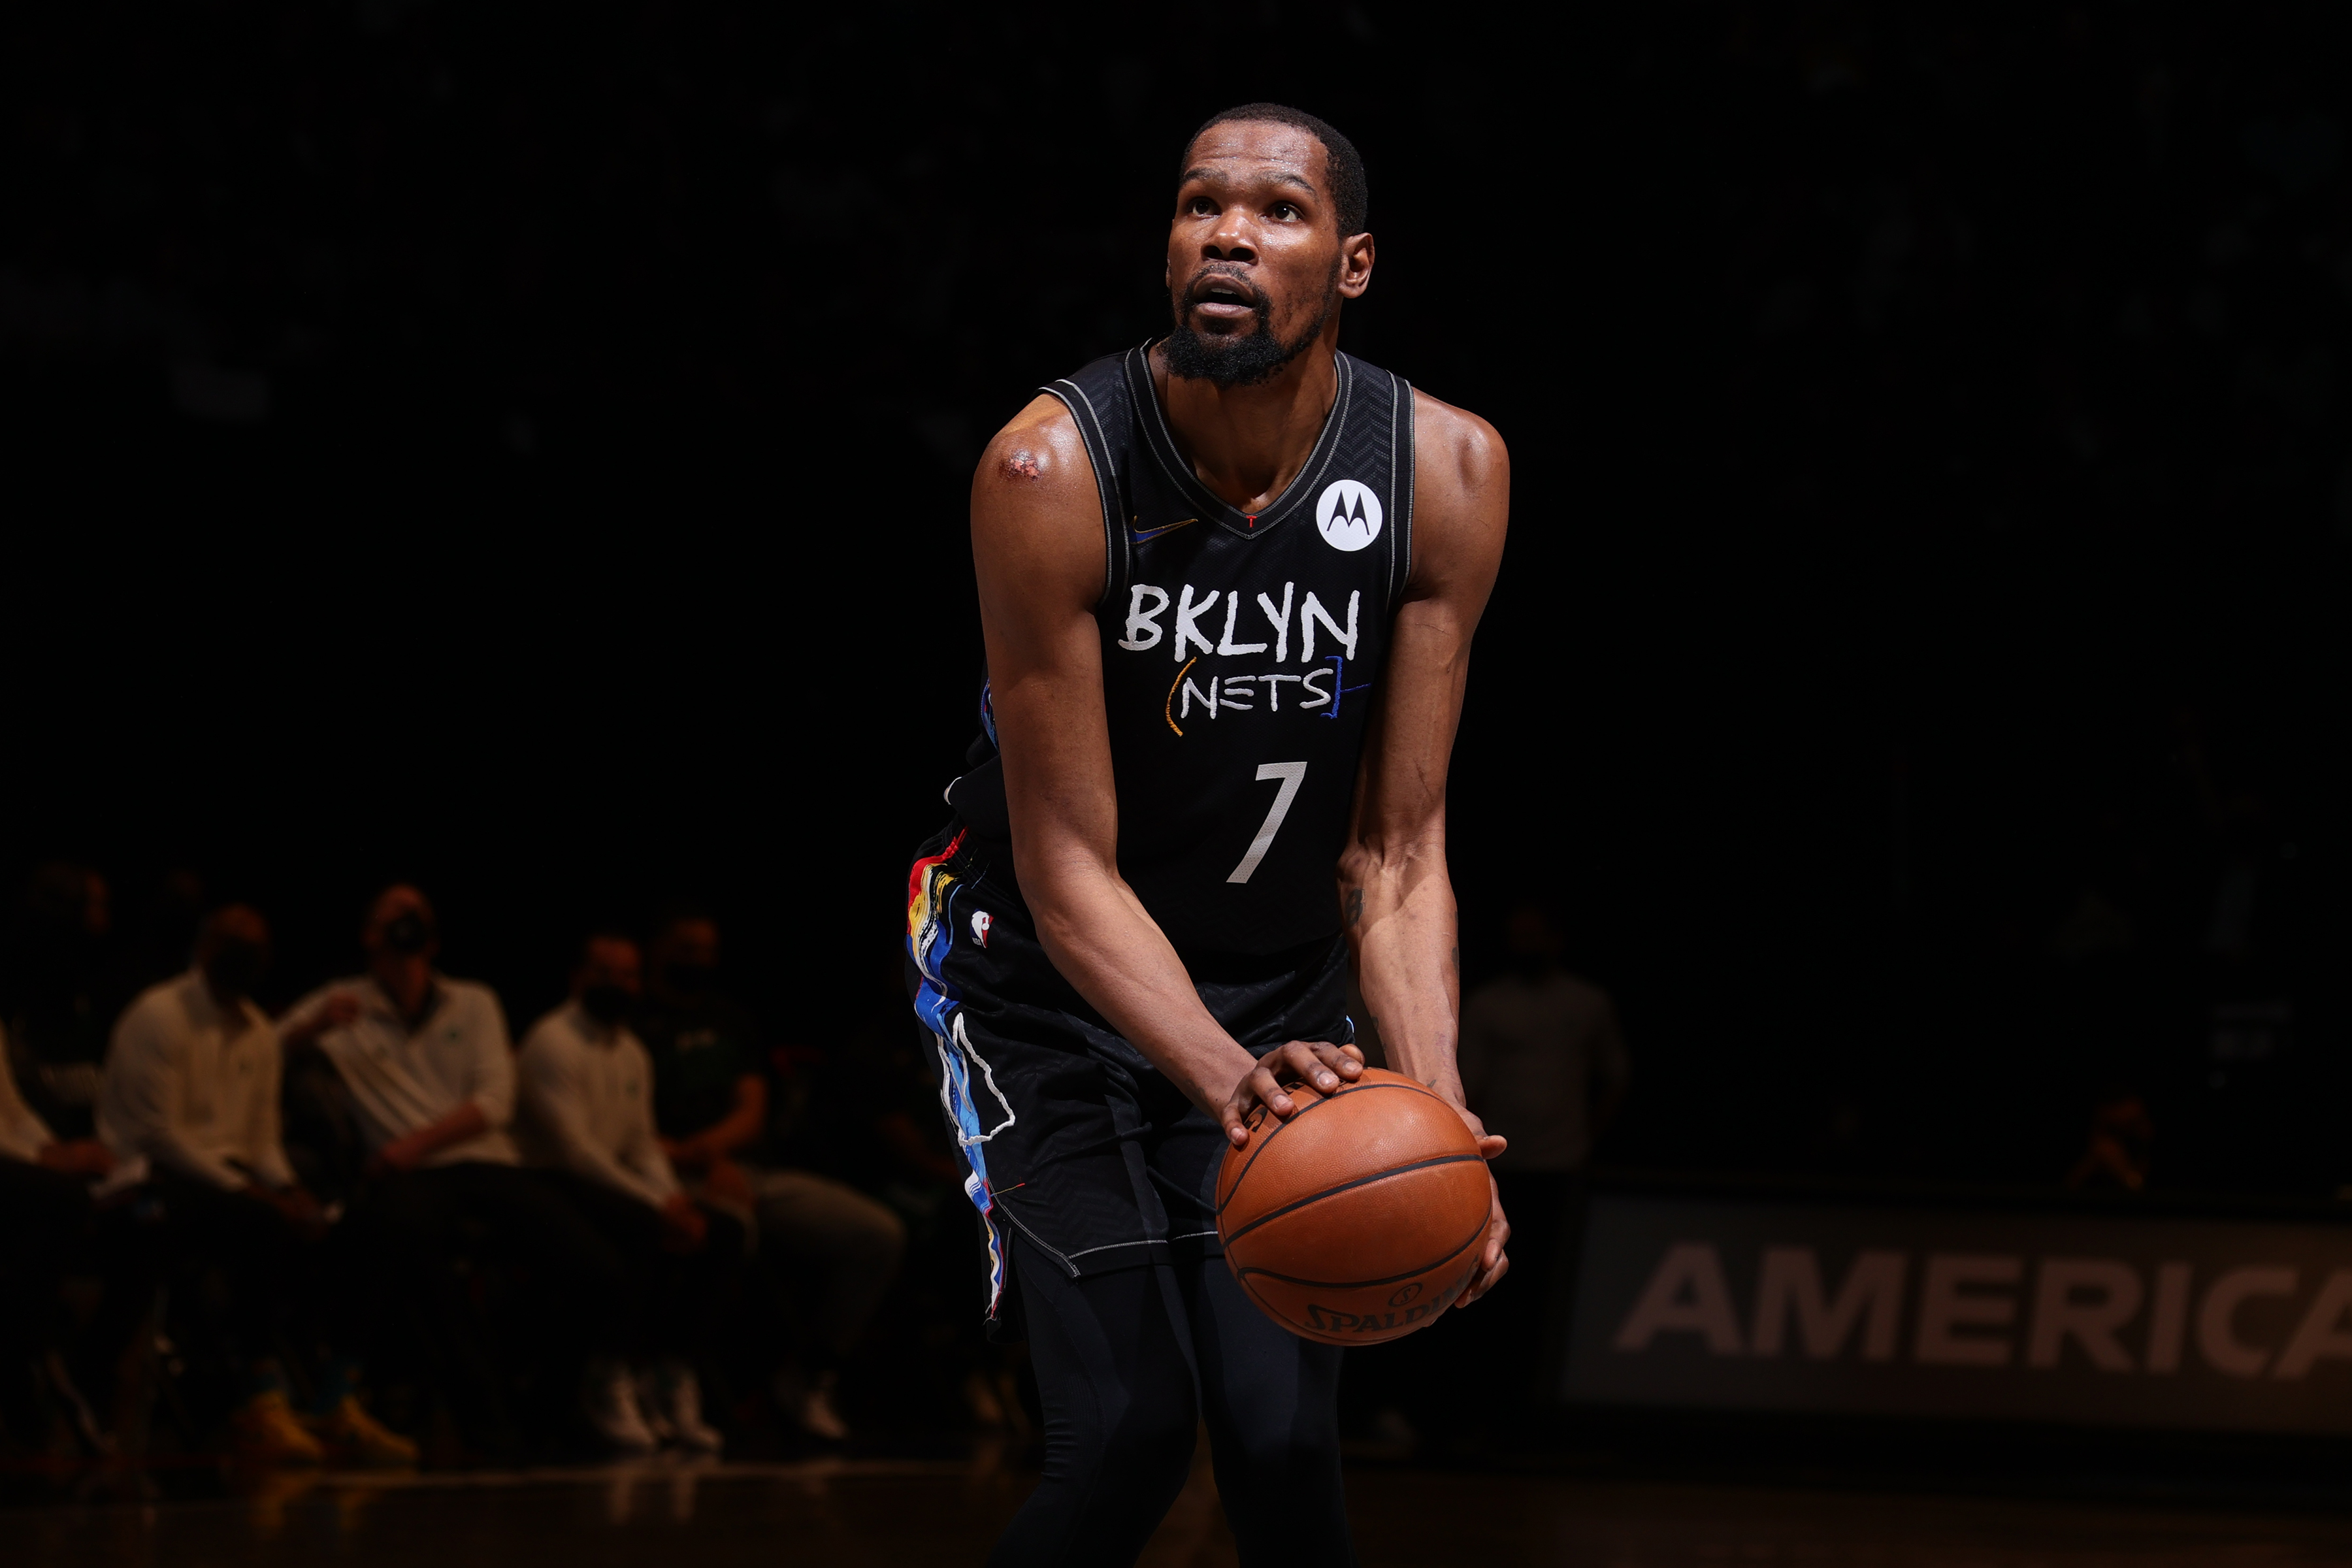 COPY - Kevin Durant 7 Brooklyn nets BED-STUY M online discount.